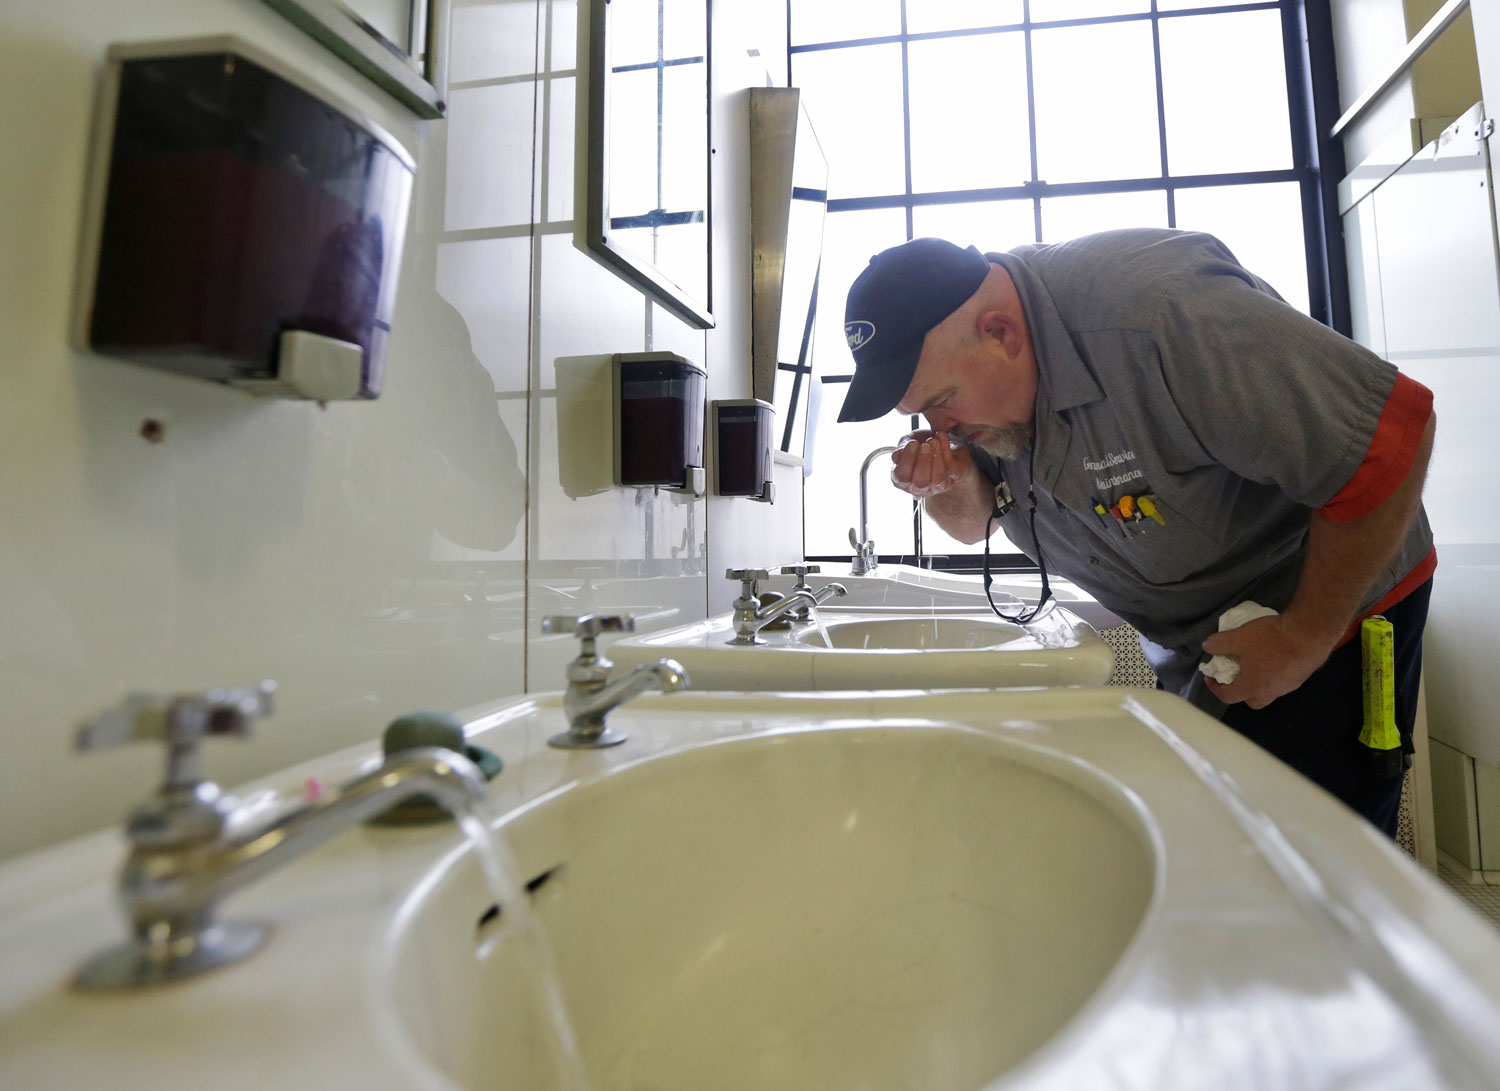 West Virginia ERs Report an Influx of Patients After Water Deemed Safe